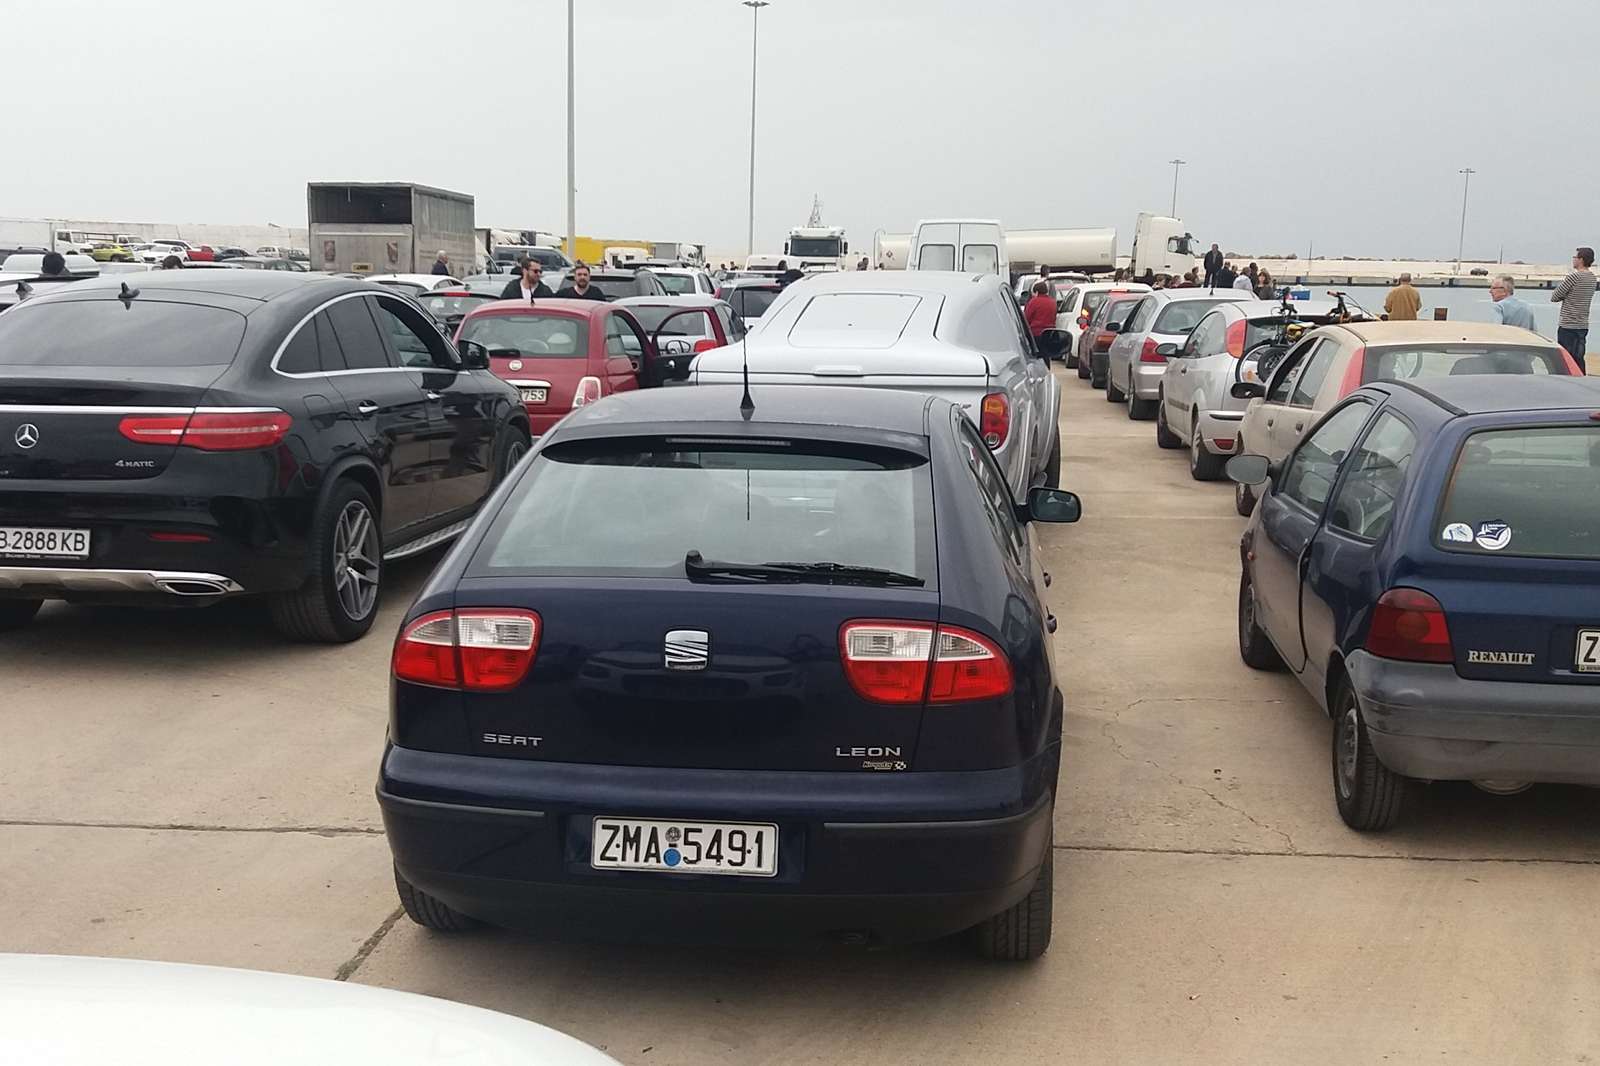 cars in the queue for the ferry online puzzle